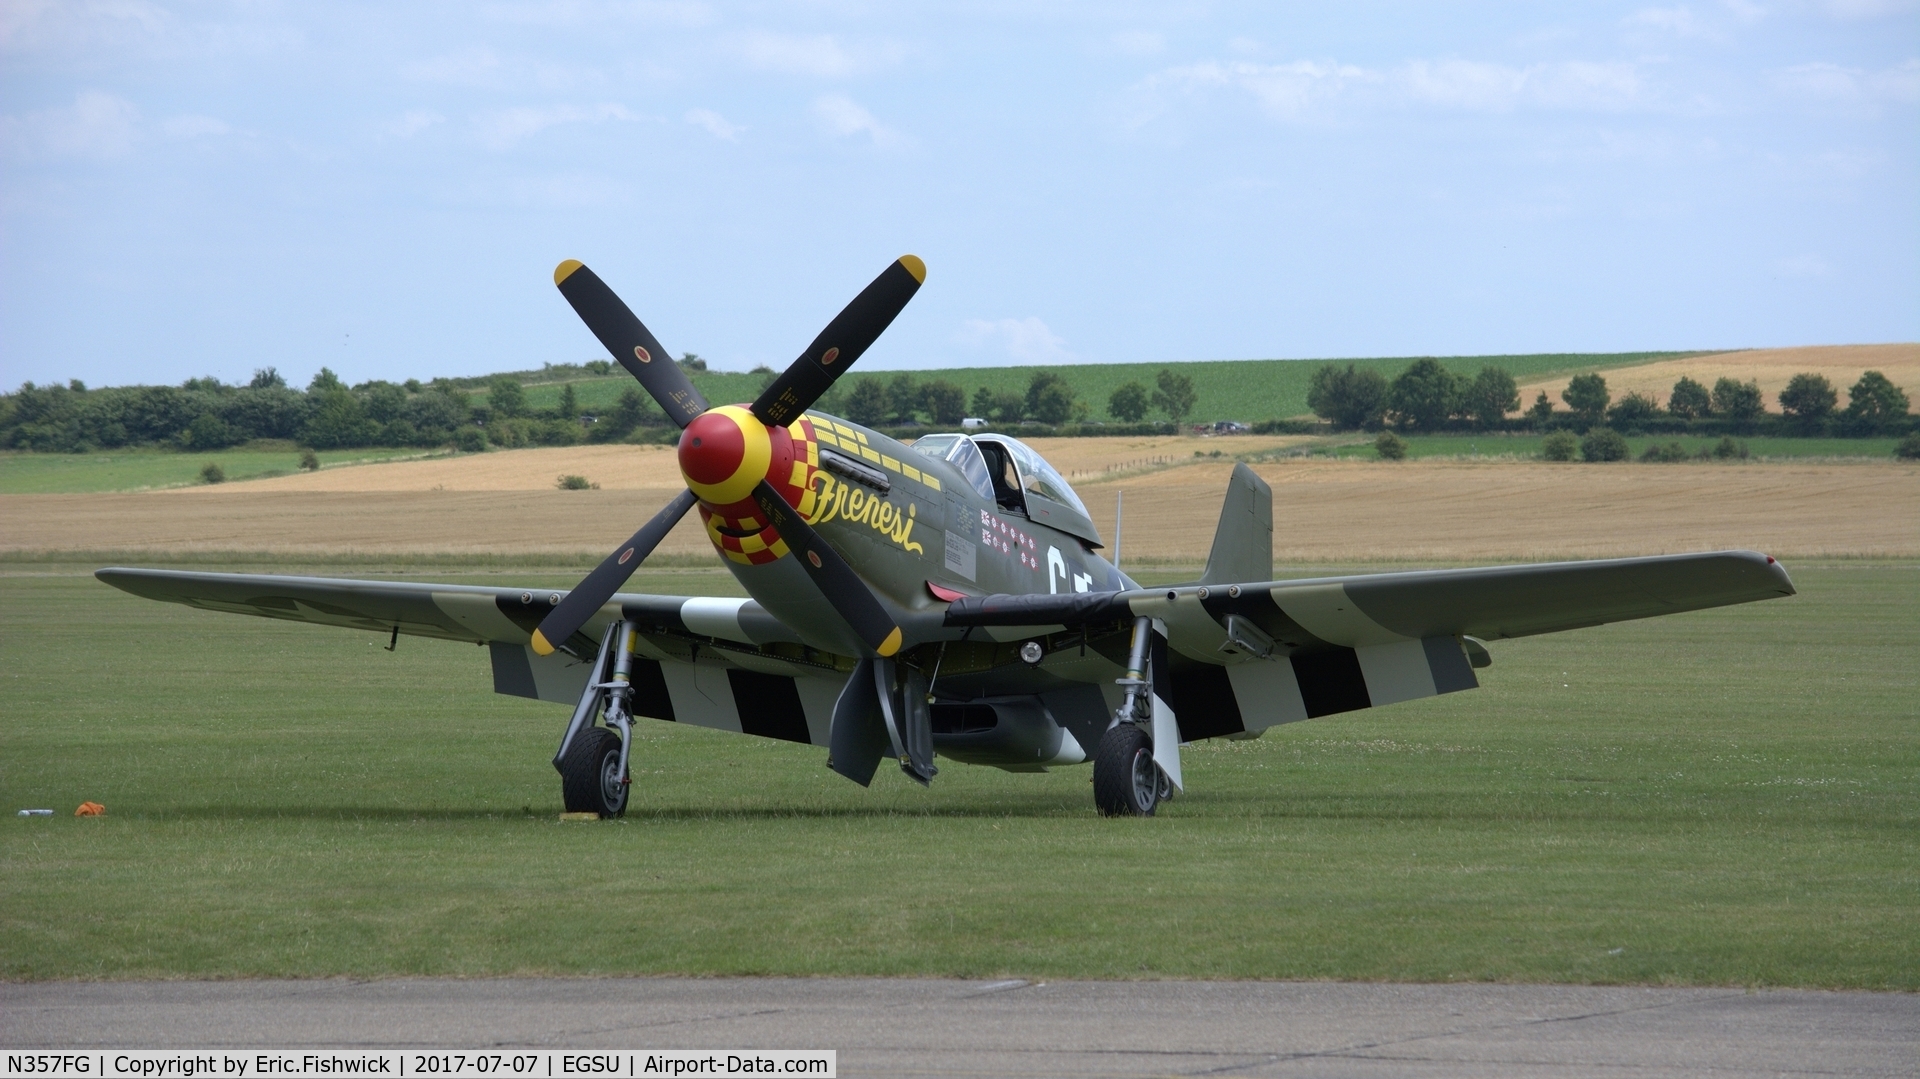 N357FG, 1944 North American P-51D C/N 44-12139, 3. 'Frenesi' on the eve of The Flying Legends Airshow, July 2017.